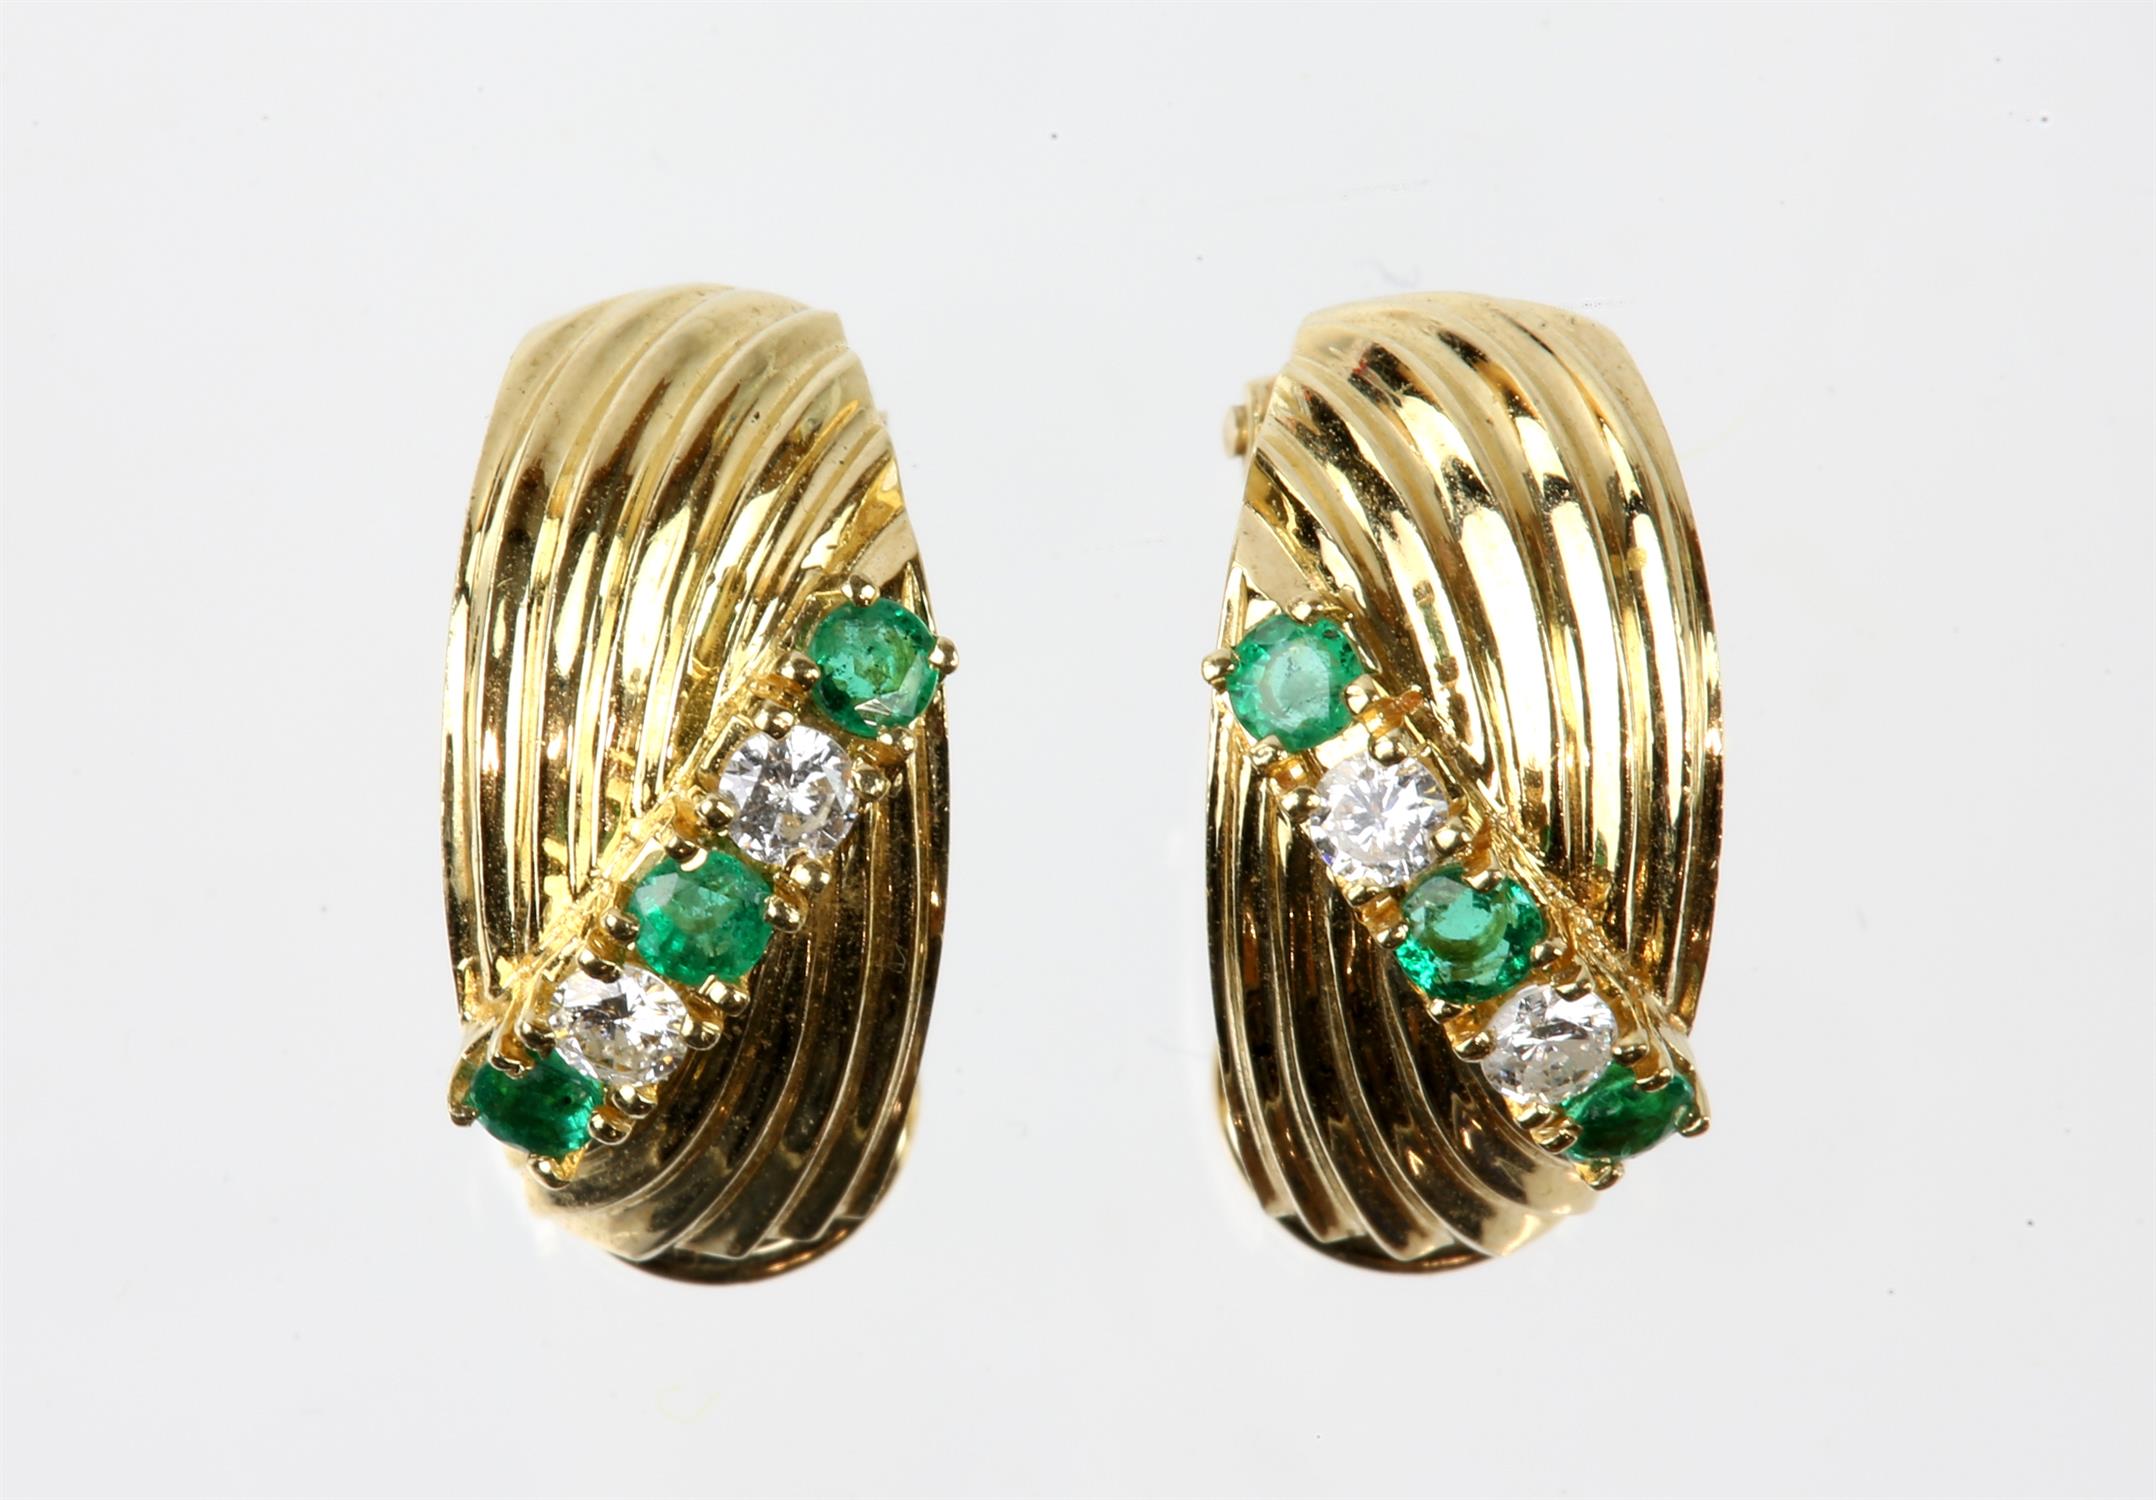 Pair of emerald and diamond clip-on earrings, each earring consisting of three round cut emeralds